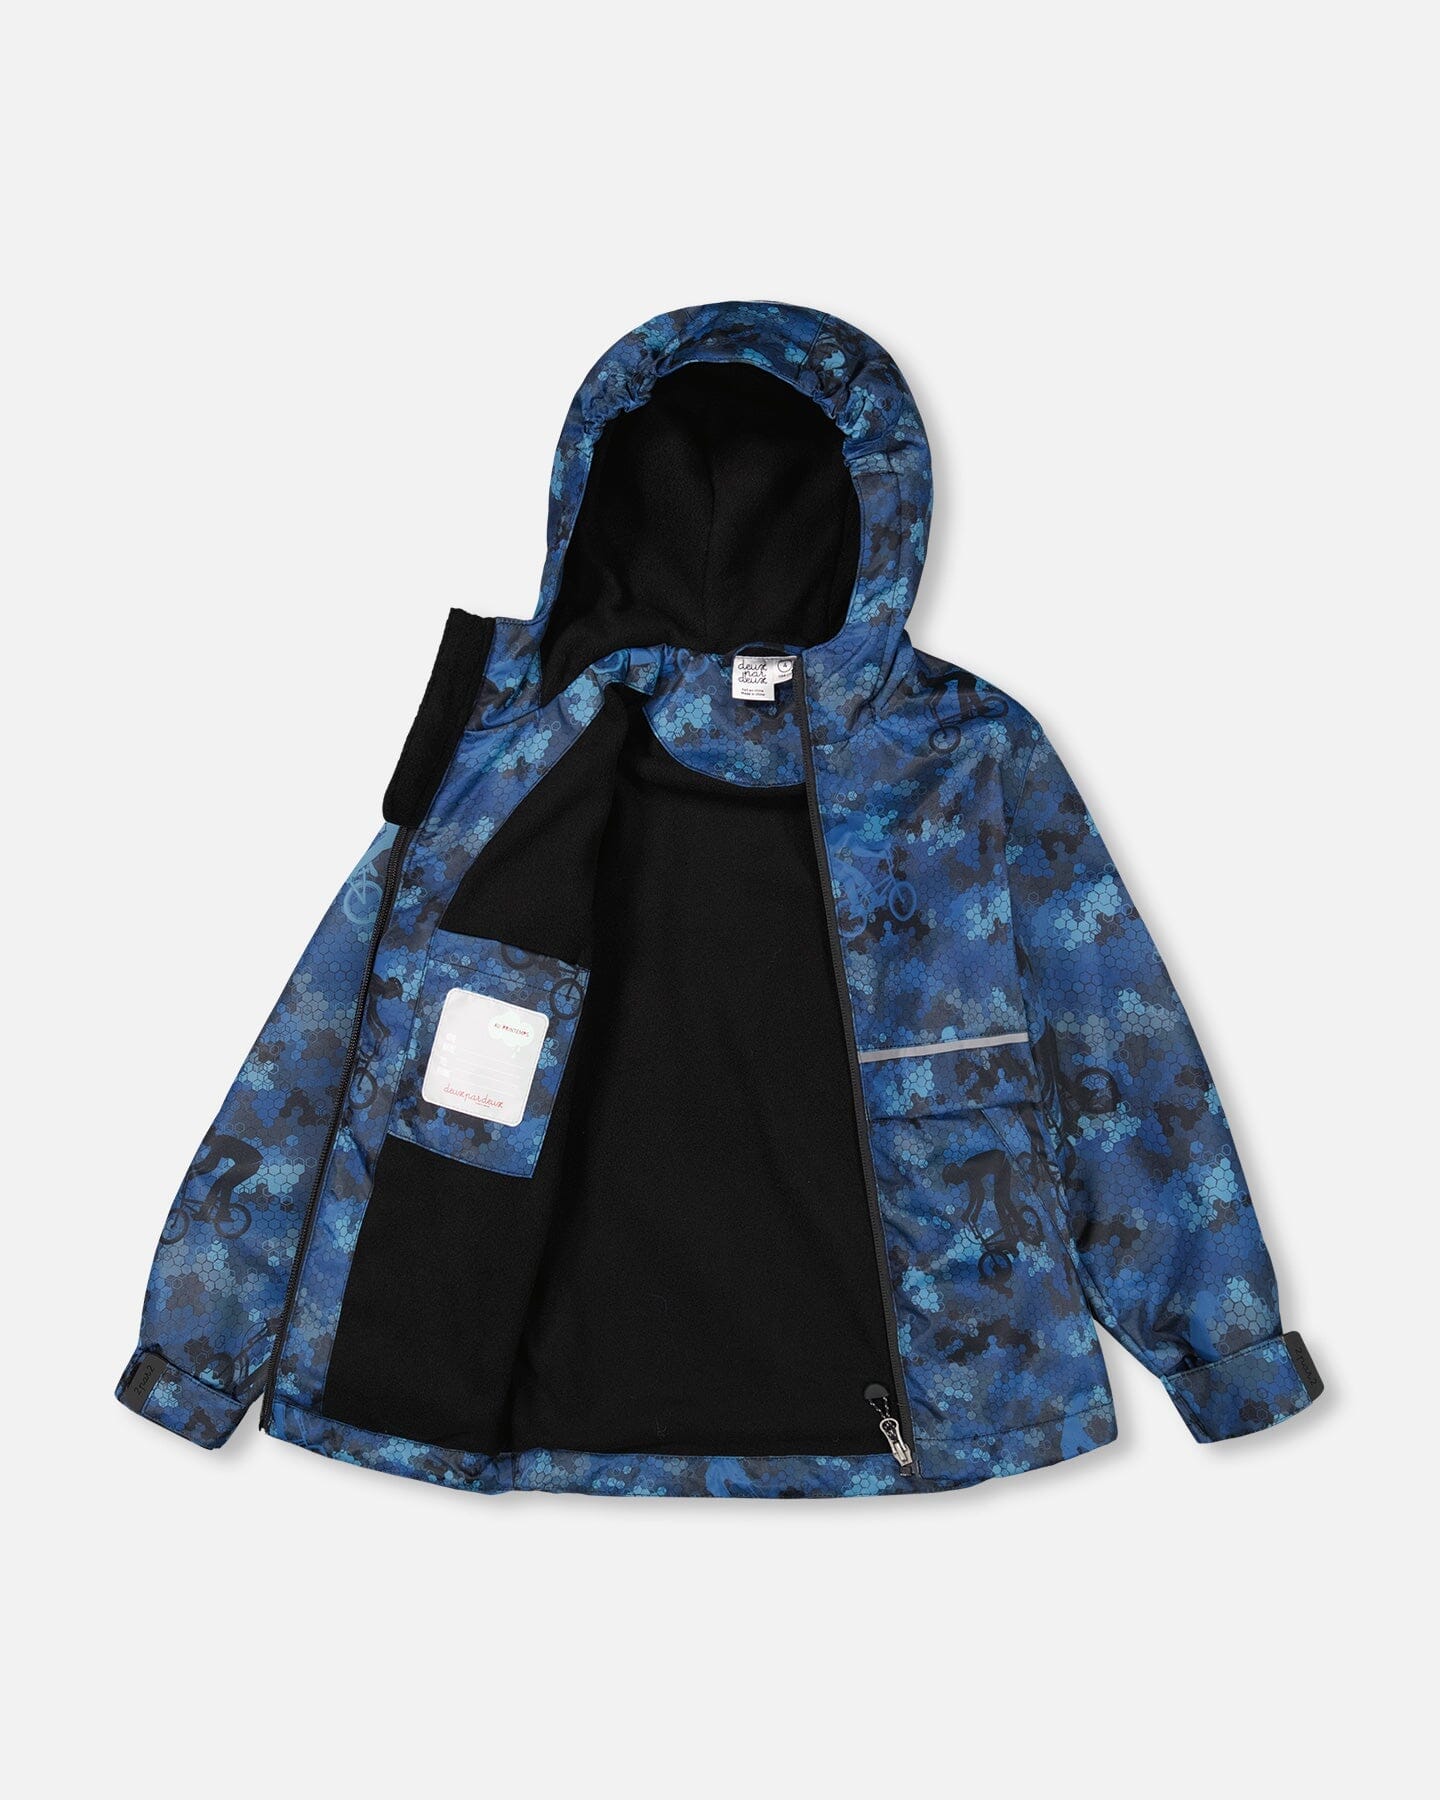 Two Piece Hooded Coat And Pant Mid-Season Set Blue Printed Bike And Black - F30W54_999